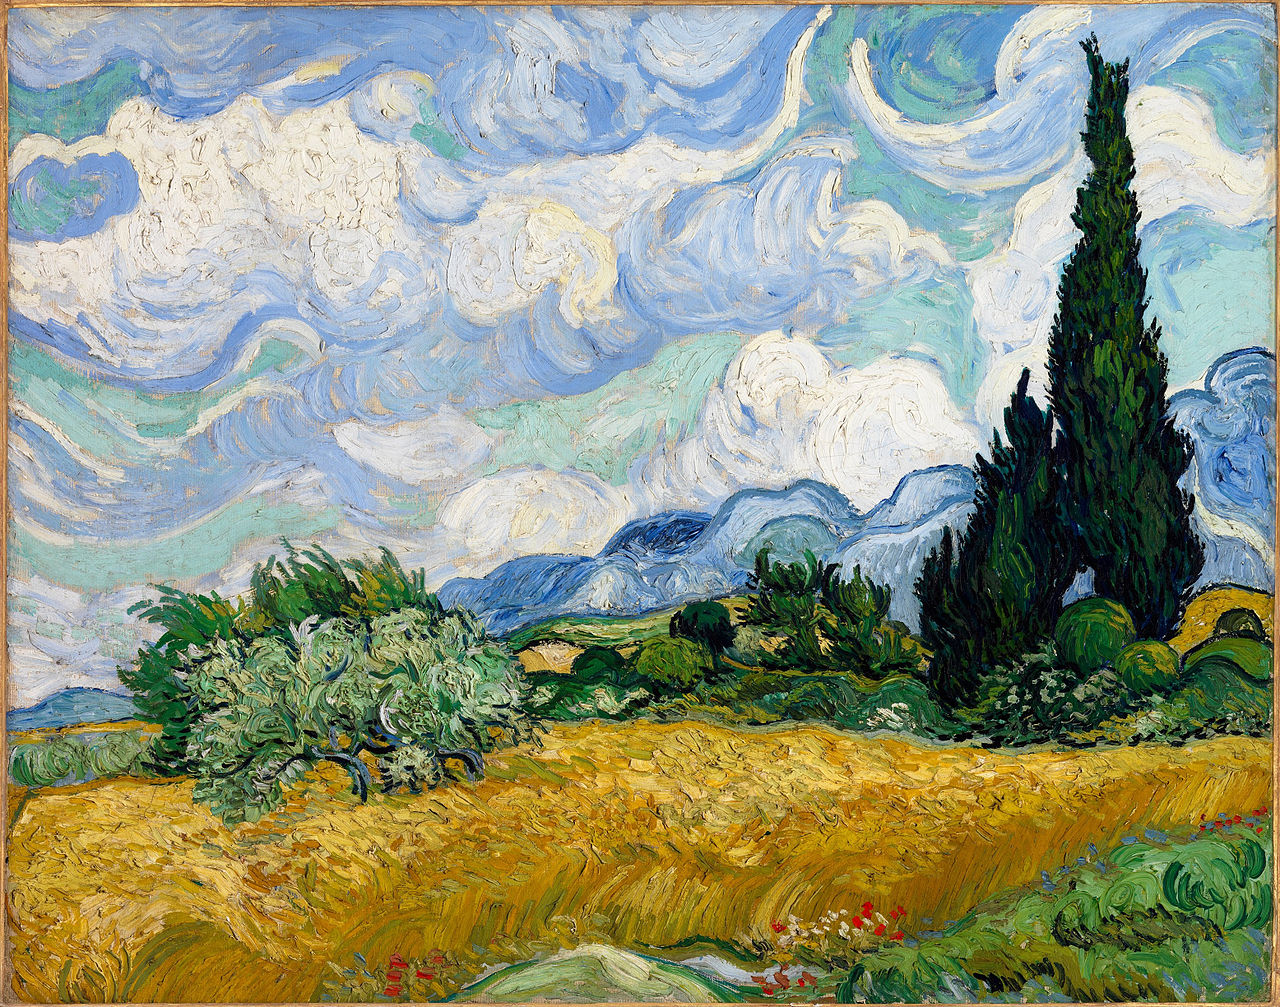 A painting of two large cypress trees under a bright afternoon sky, next to a wheat field in a landscape of hills, bushes, flowers and trees